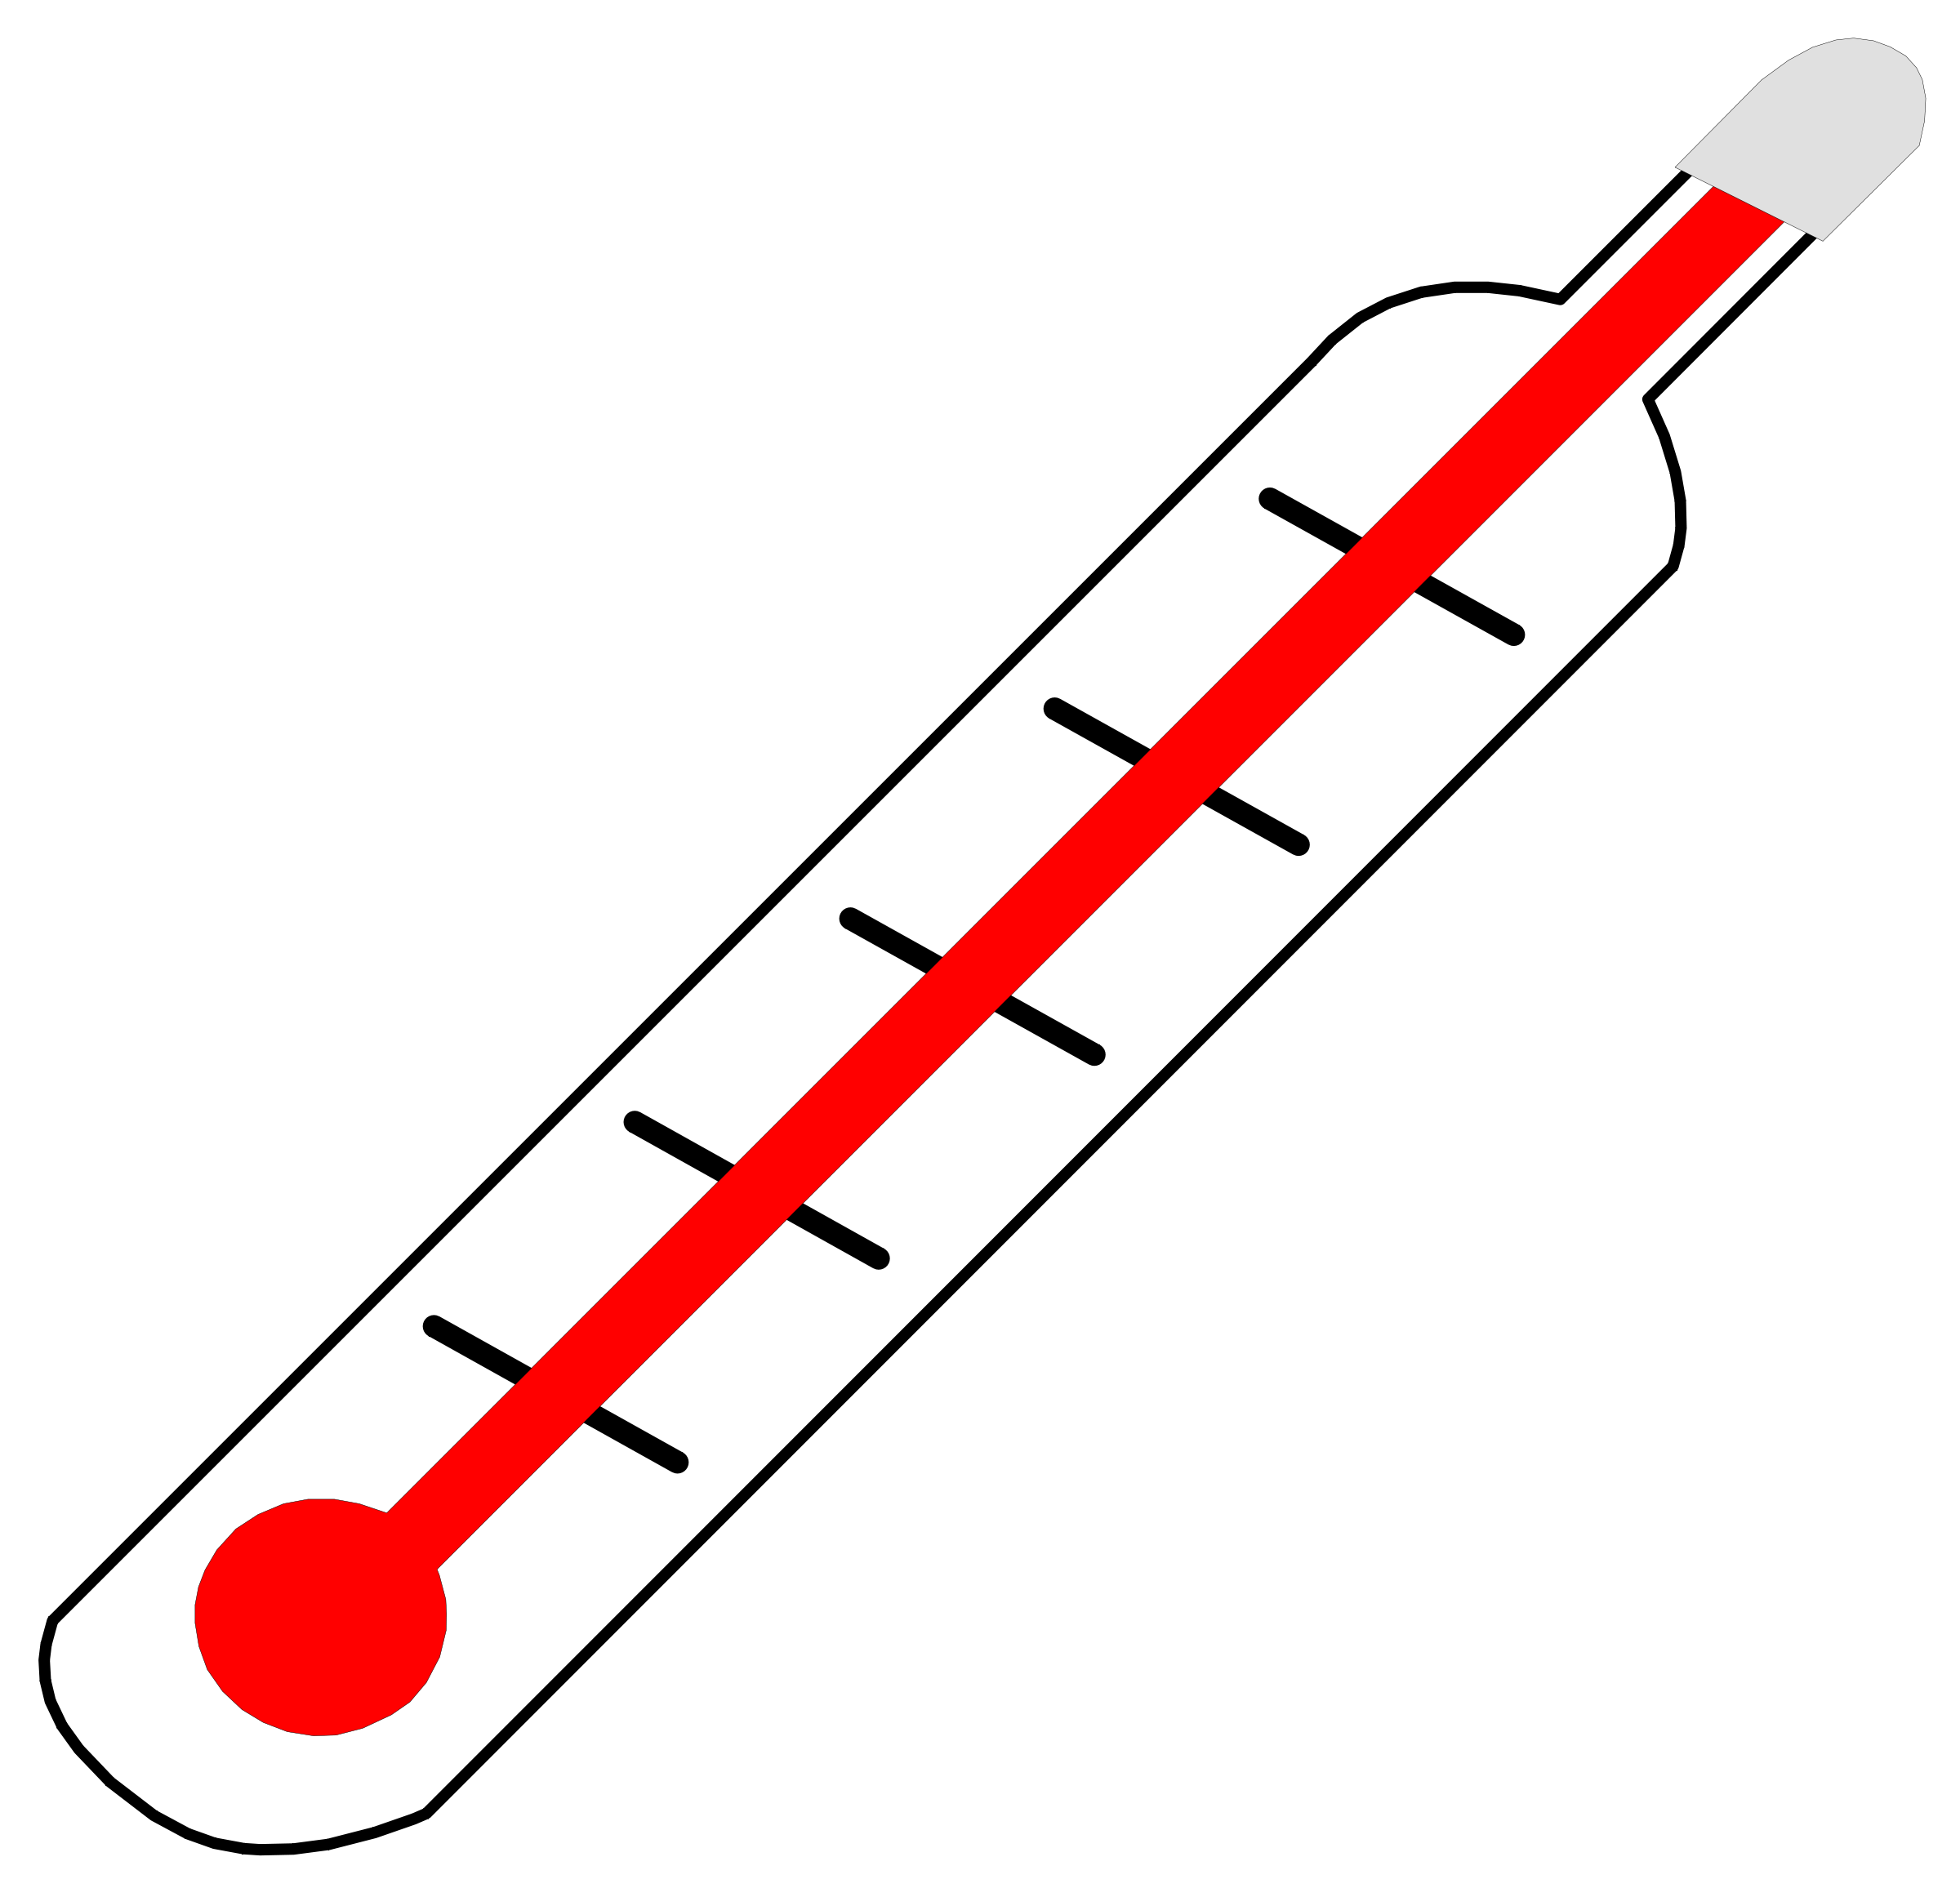 Cartoon thermometer clipart free clip art images 2 - Clipartix